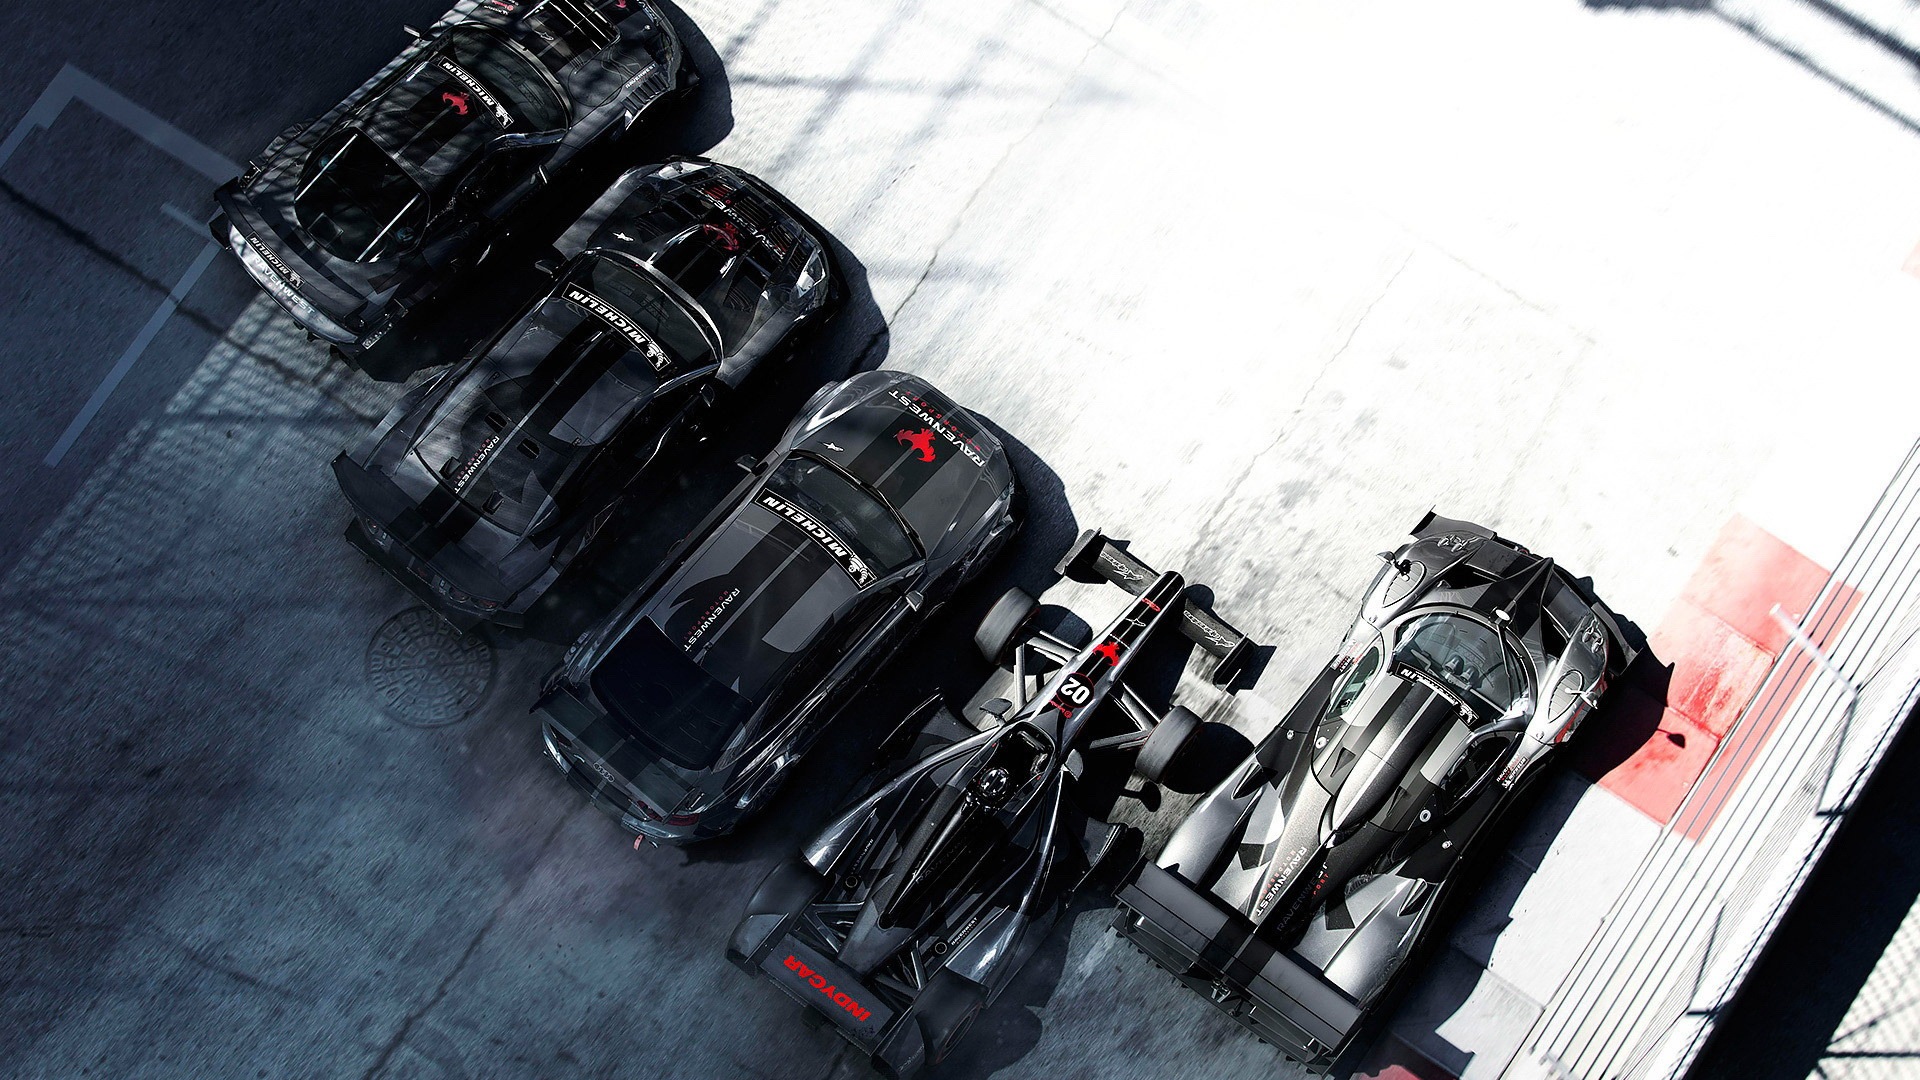 GRID: Autosport HD game wallpapers #5 - 1920x1080